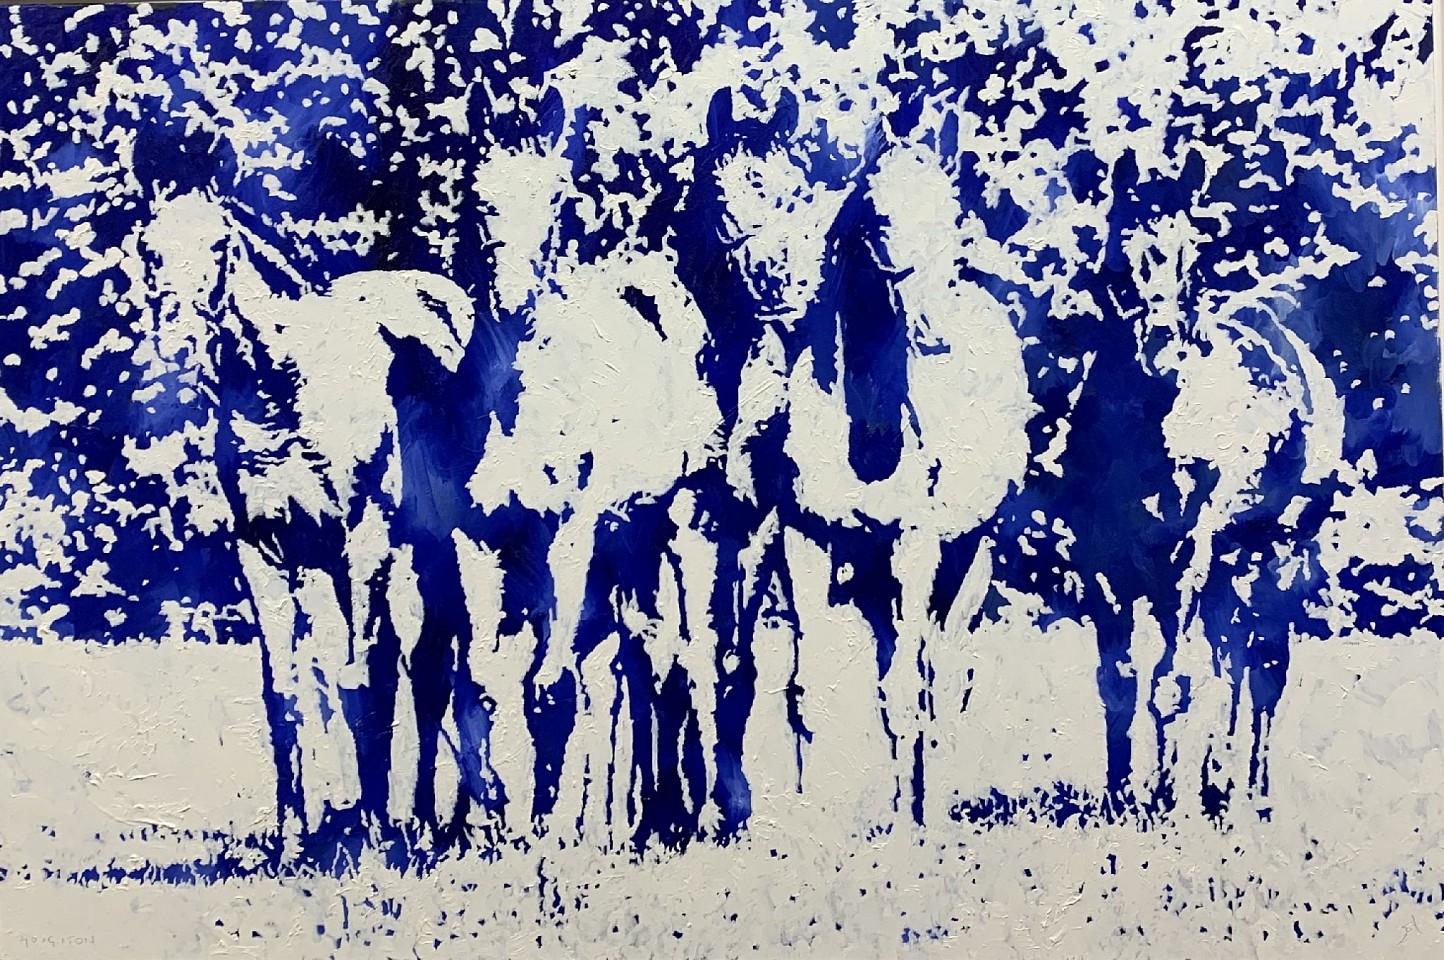 Jeremy Houghton, The Queen's Yearlings, 2019
Oil on Canvas, 40 x 60 in. (152.4 x 101.6 cm)
SOLD
7354
&bull;